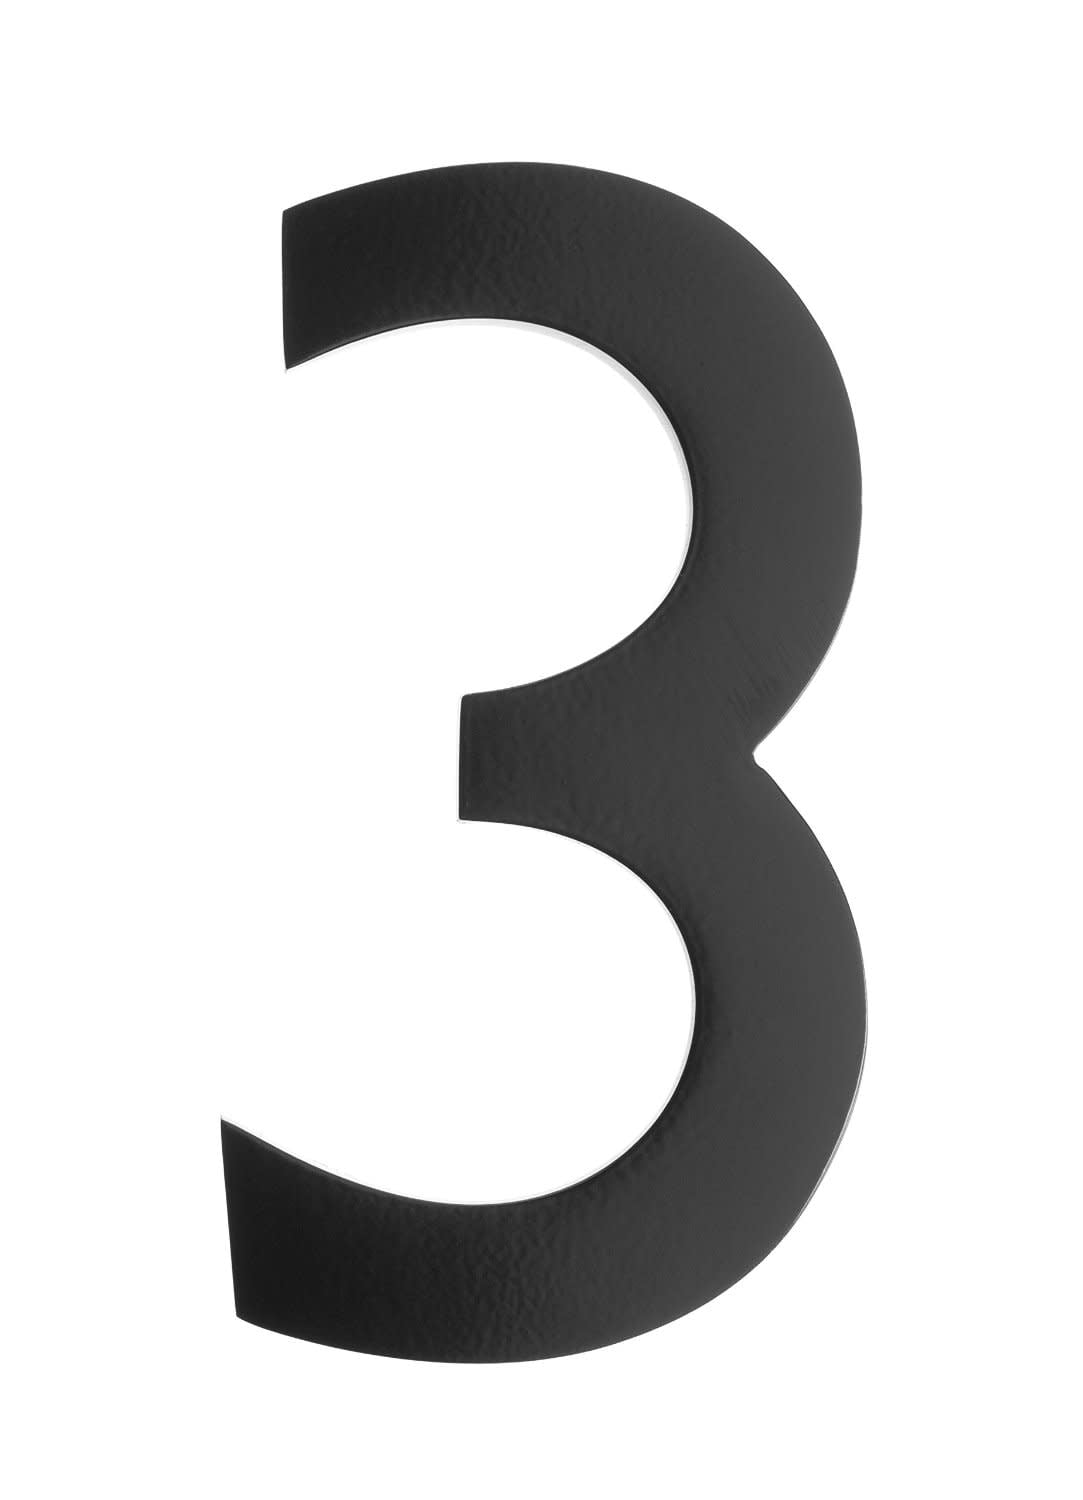 3585b-3 Floating House Number 3, Black - 5 In.